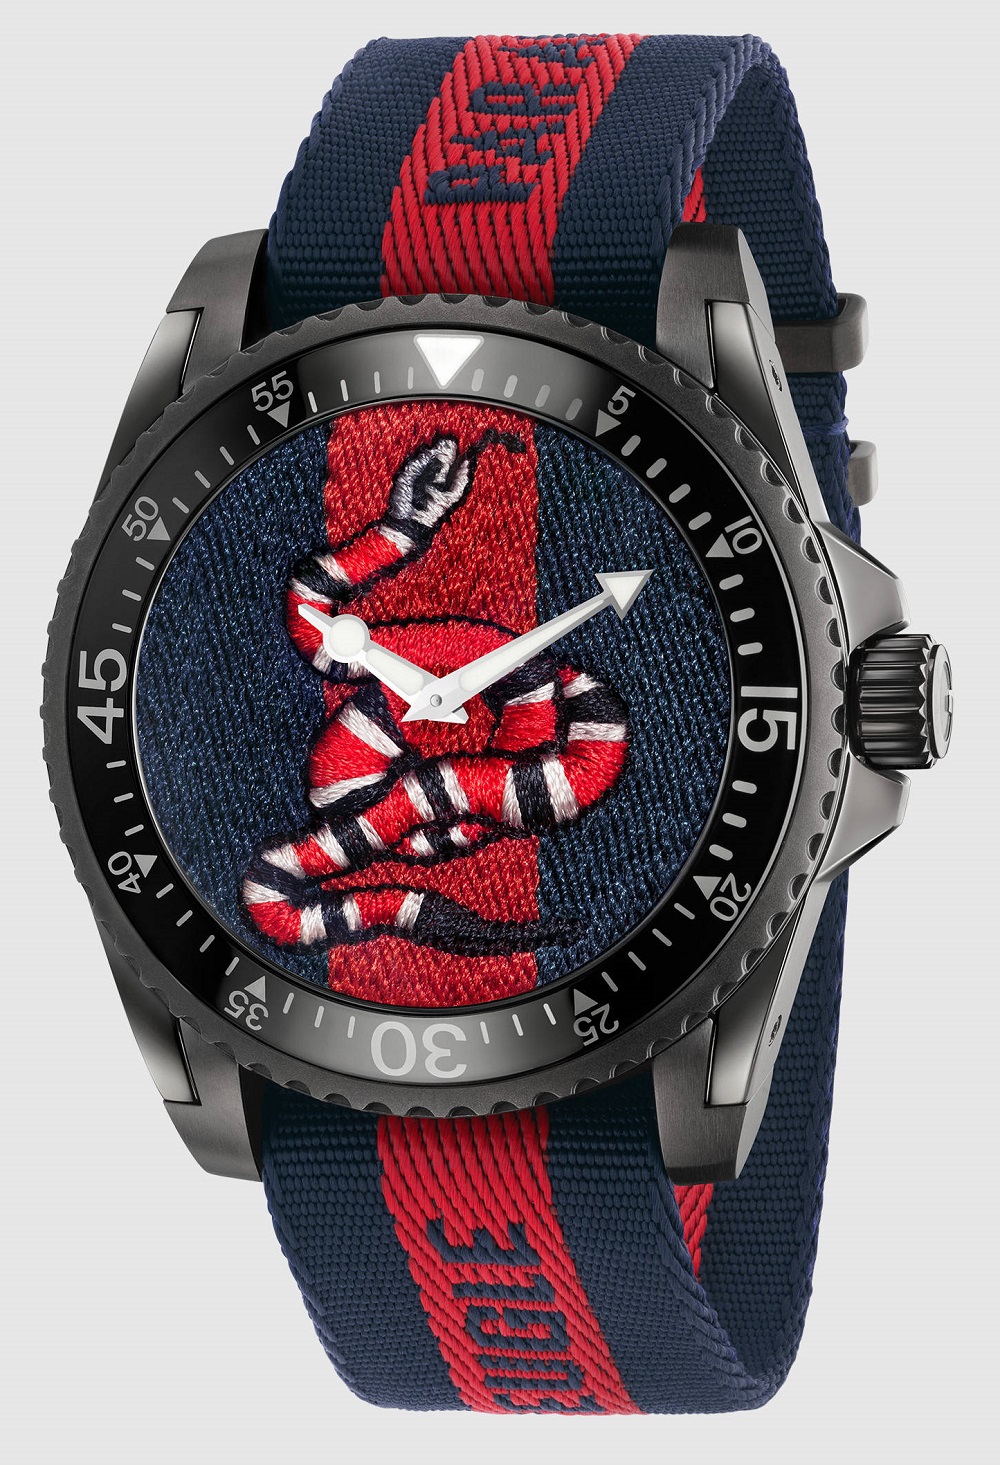 vervaldatum ernstig team Gucci Dive Watches For 2017 With Embroidery & Rubber Animal Dials |  aBlogtoWatch